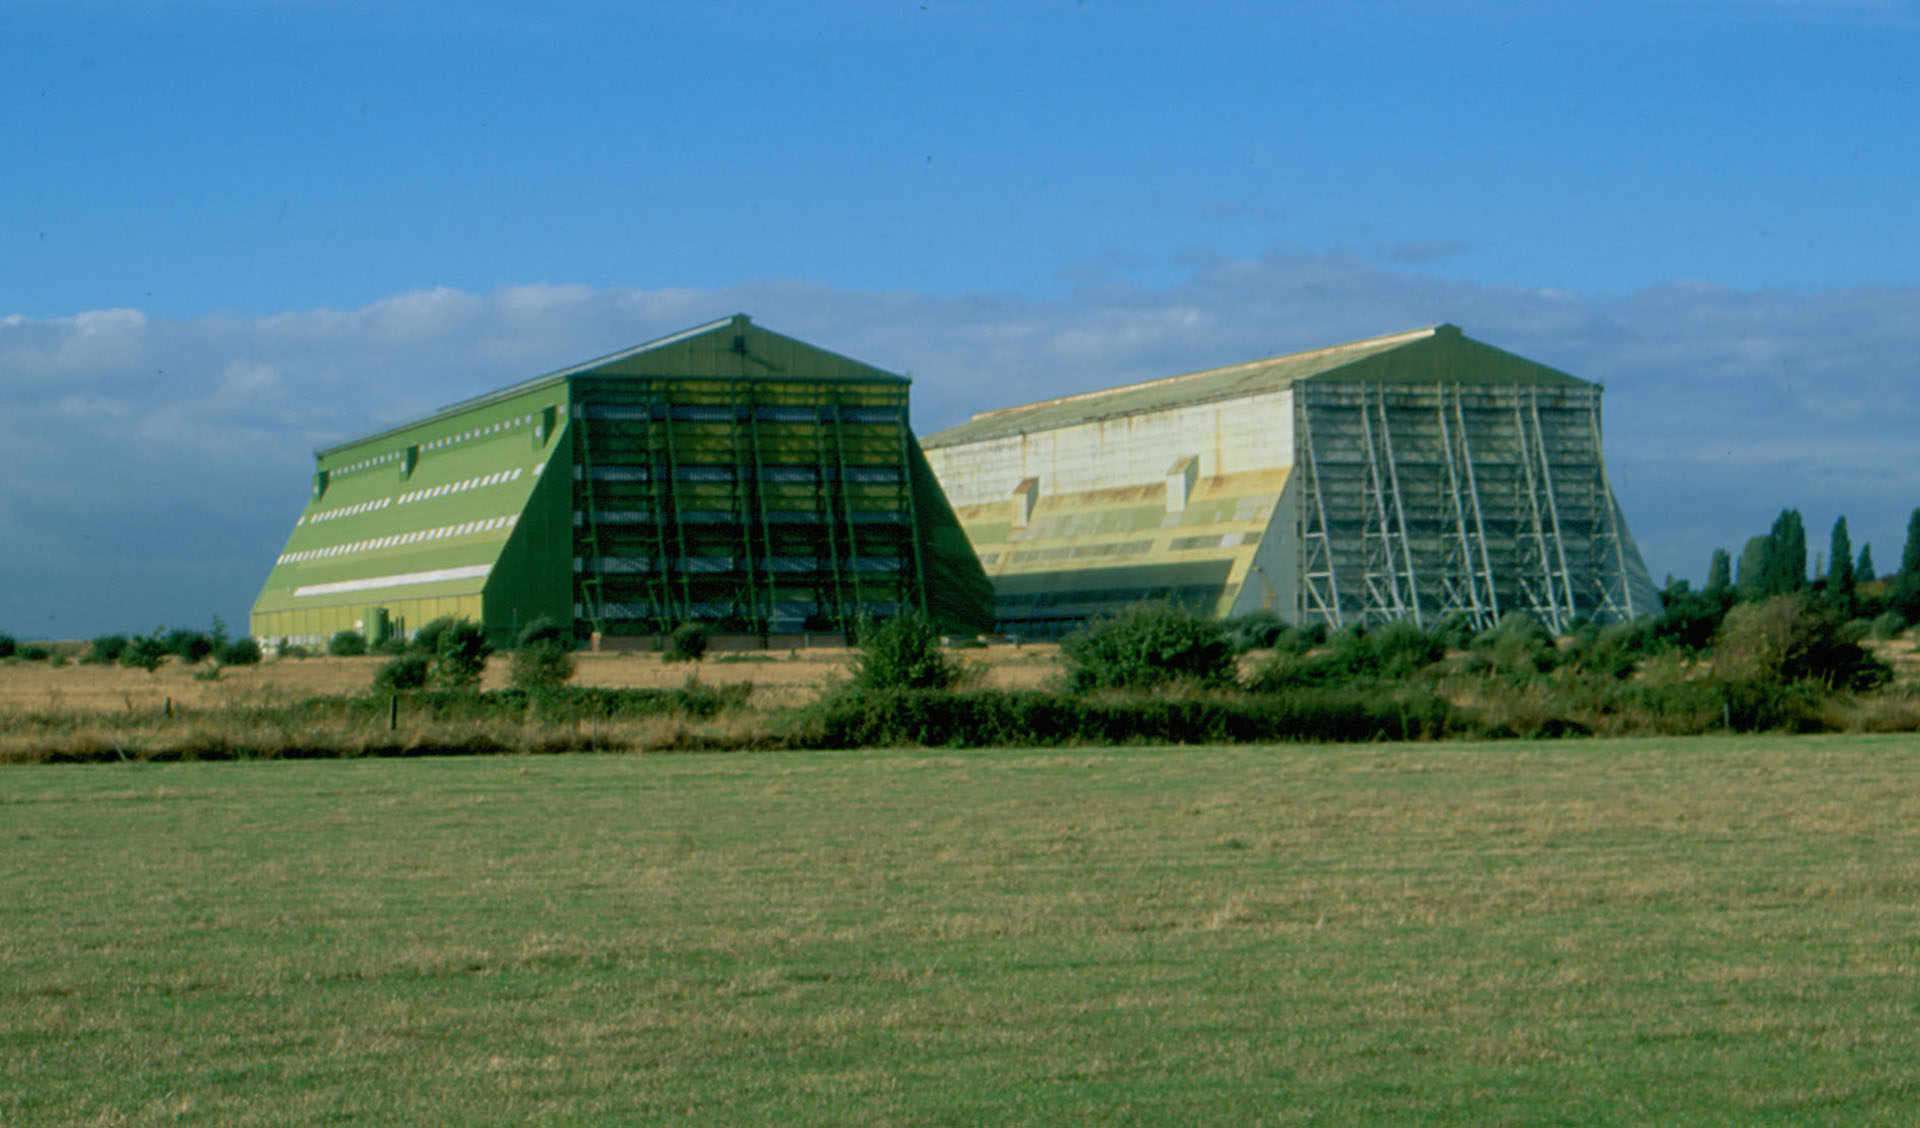 Cardington, Bedfordshire, the two, massive, corrugated iron clad the airship hangars are listed Grade II*